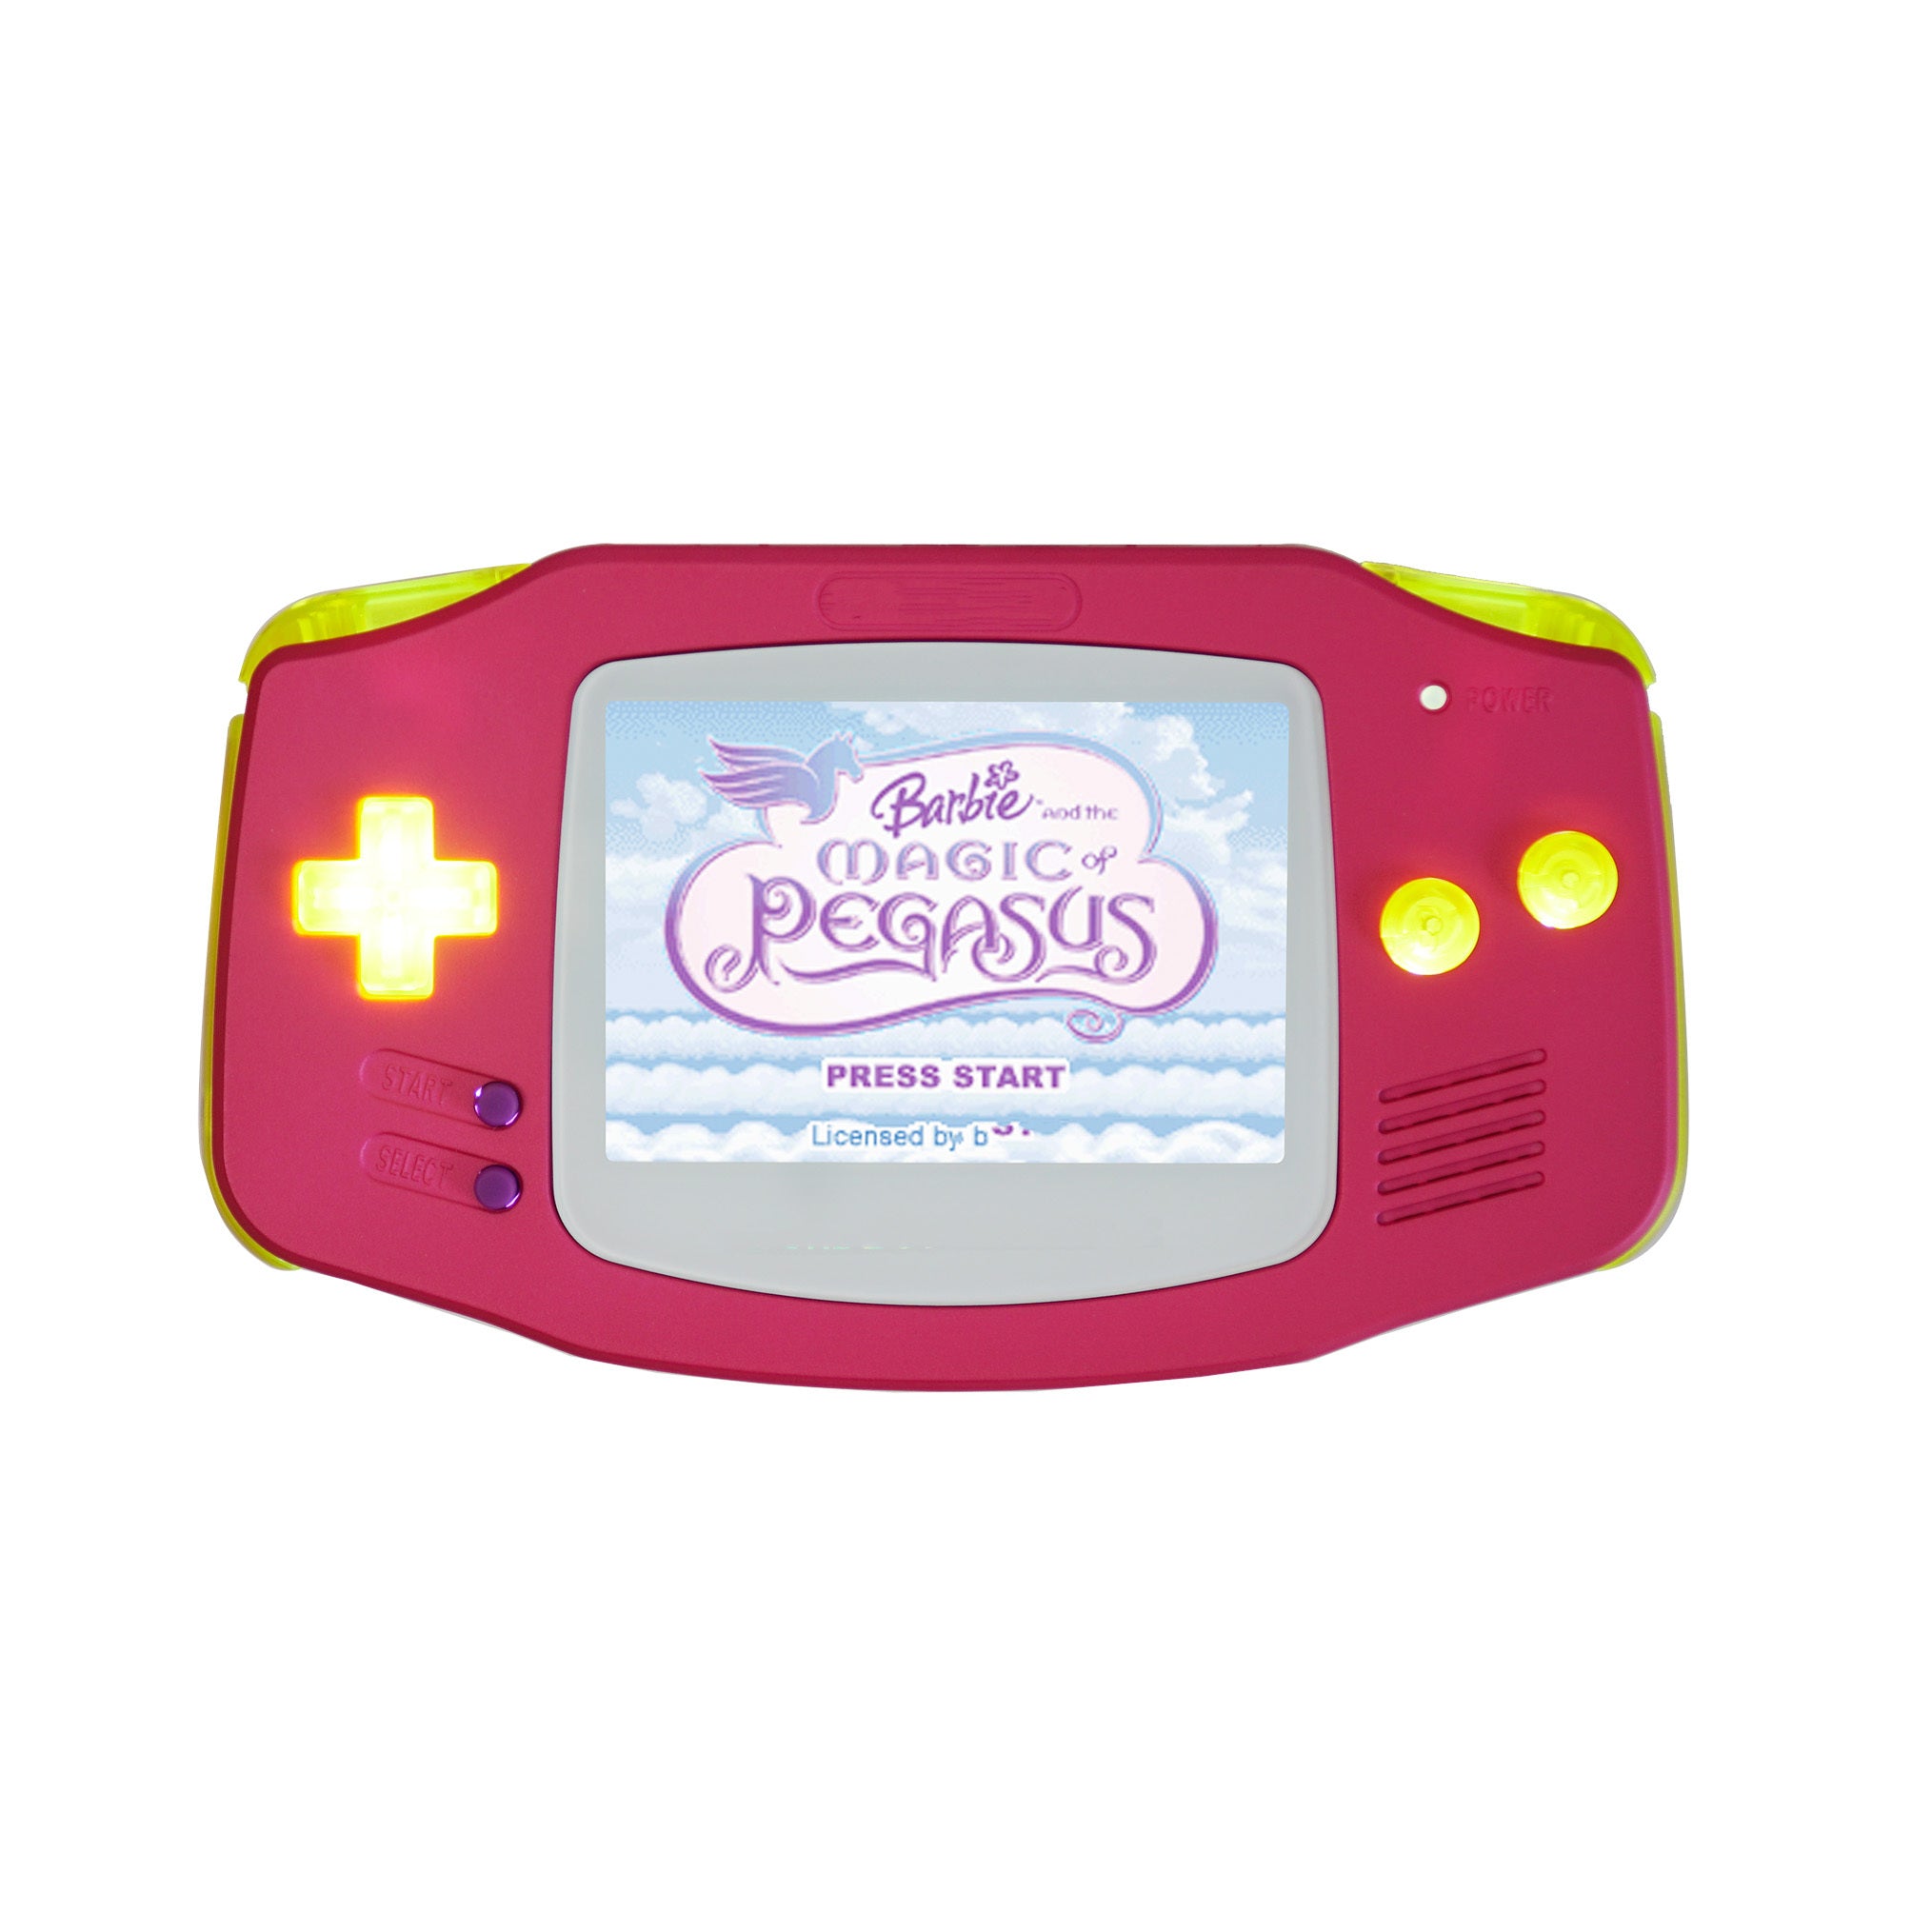 Made to Order Game Boy Advance Ultimate Console - 91' Spark Skate | IPS & LED UPGRADE ONLY Hand Held Legend